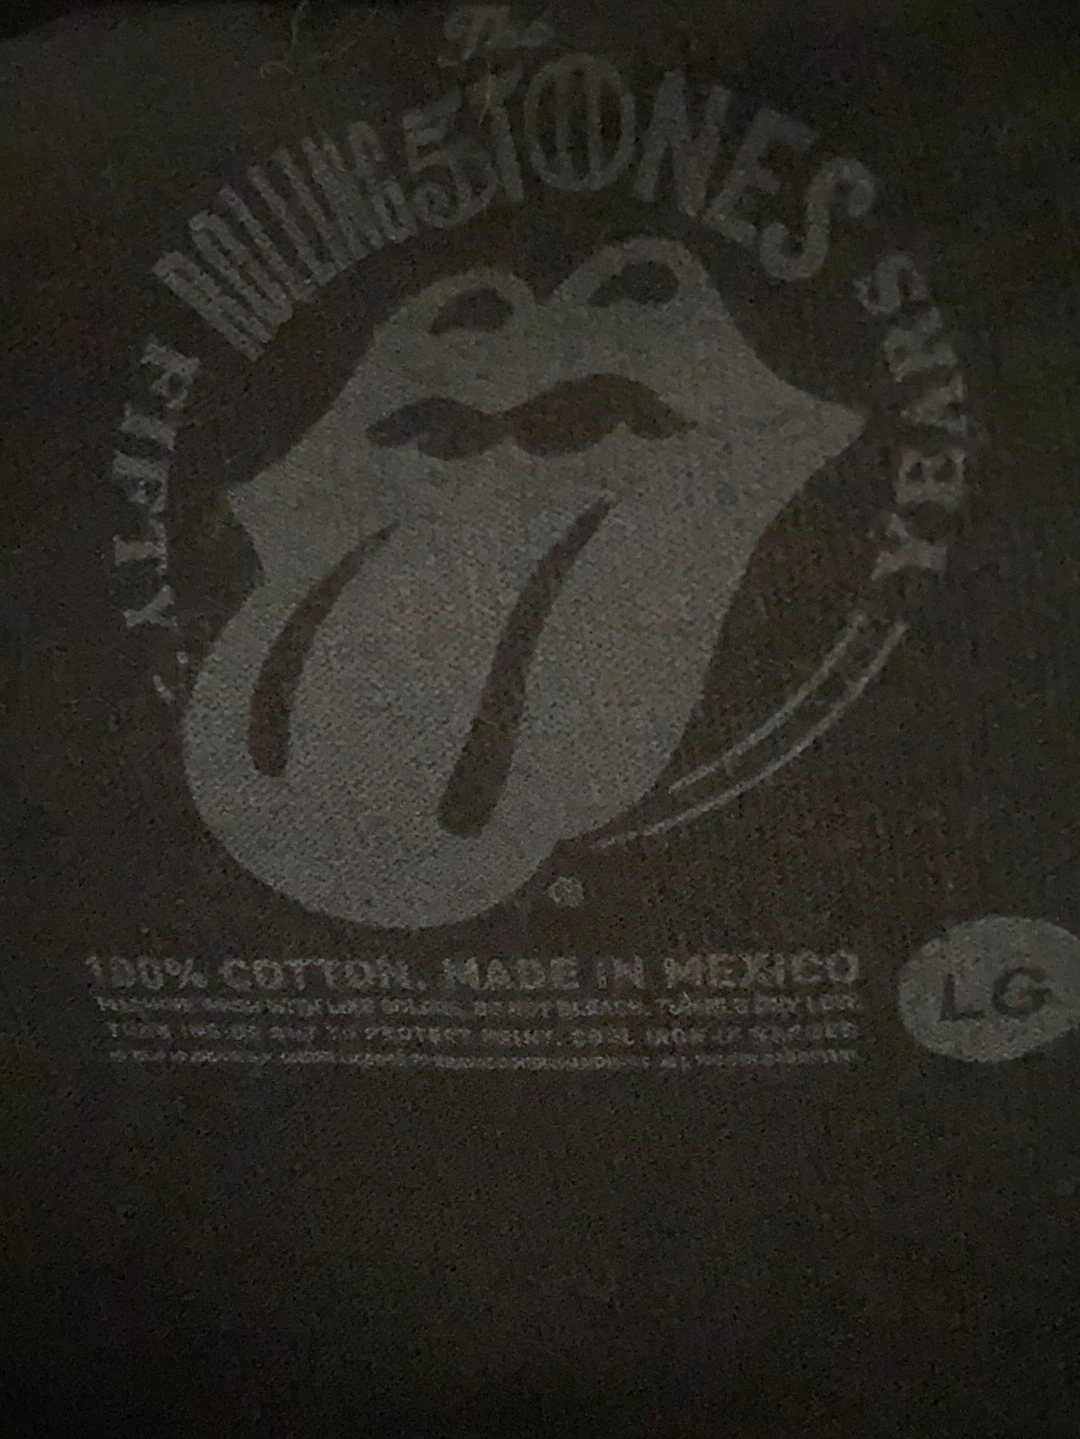 The Rolling Stones Band Tee - Large